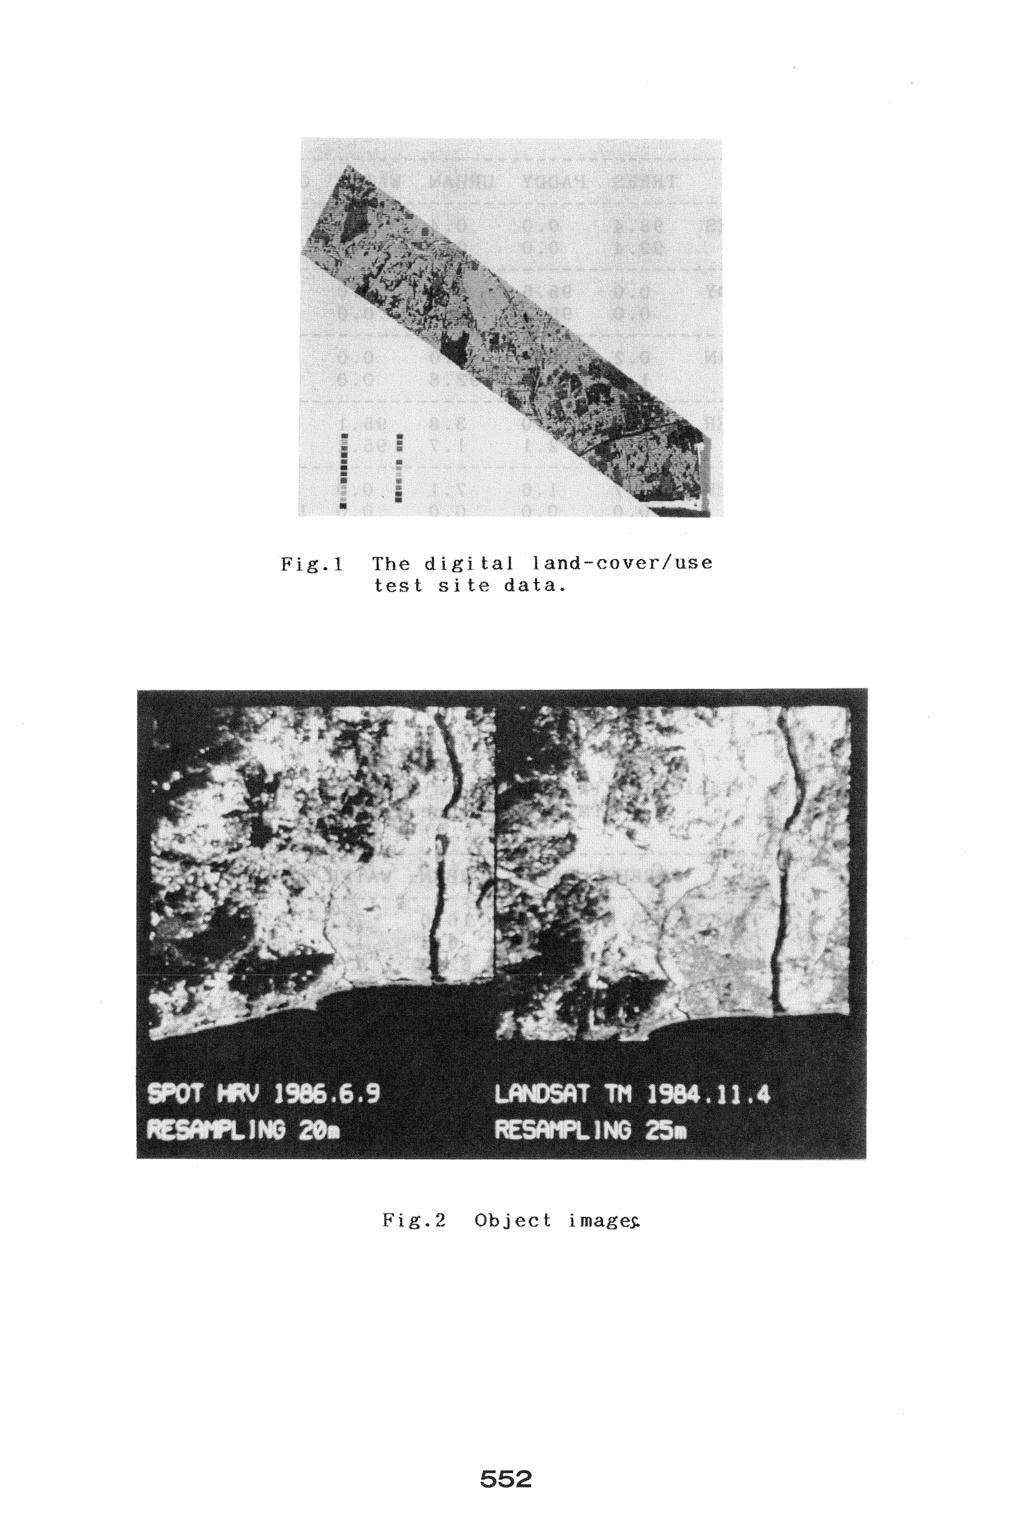 Fig.l The digital land-cover/use